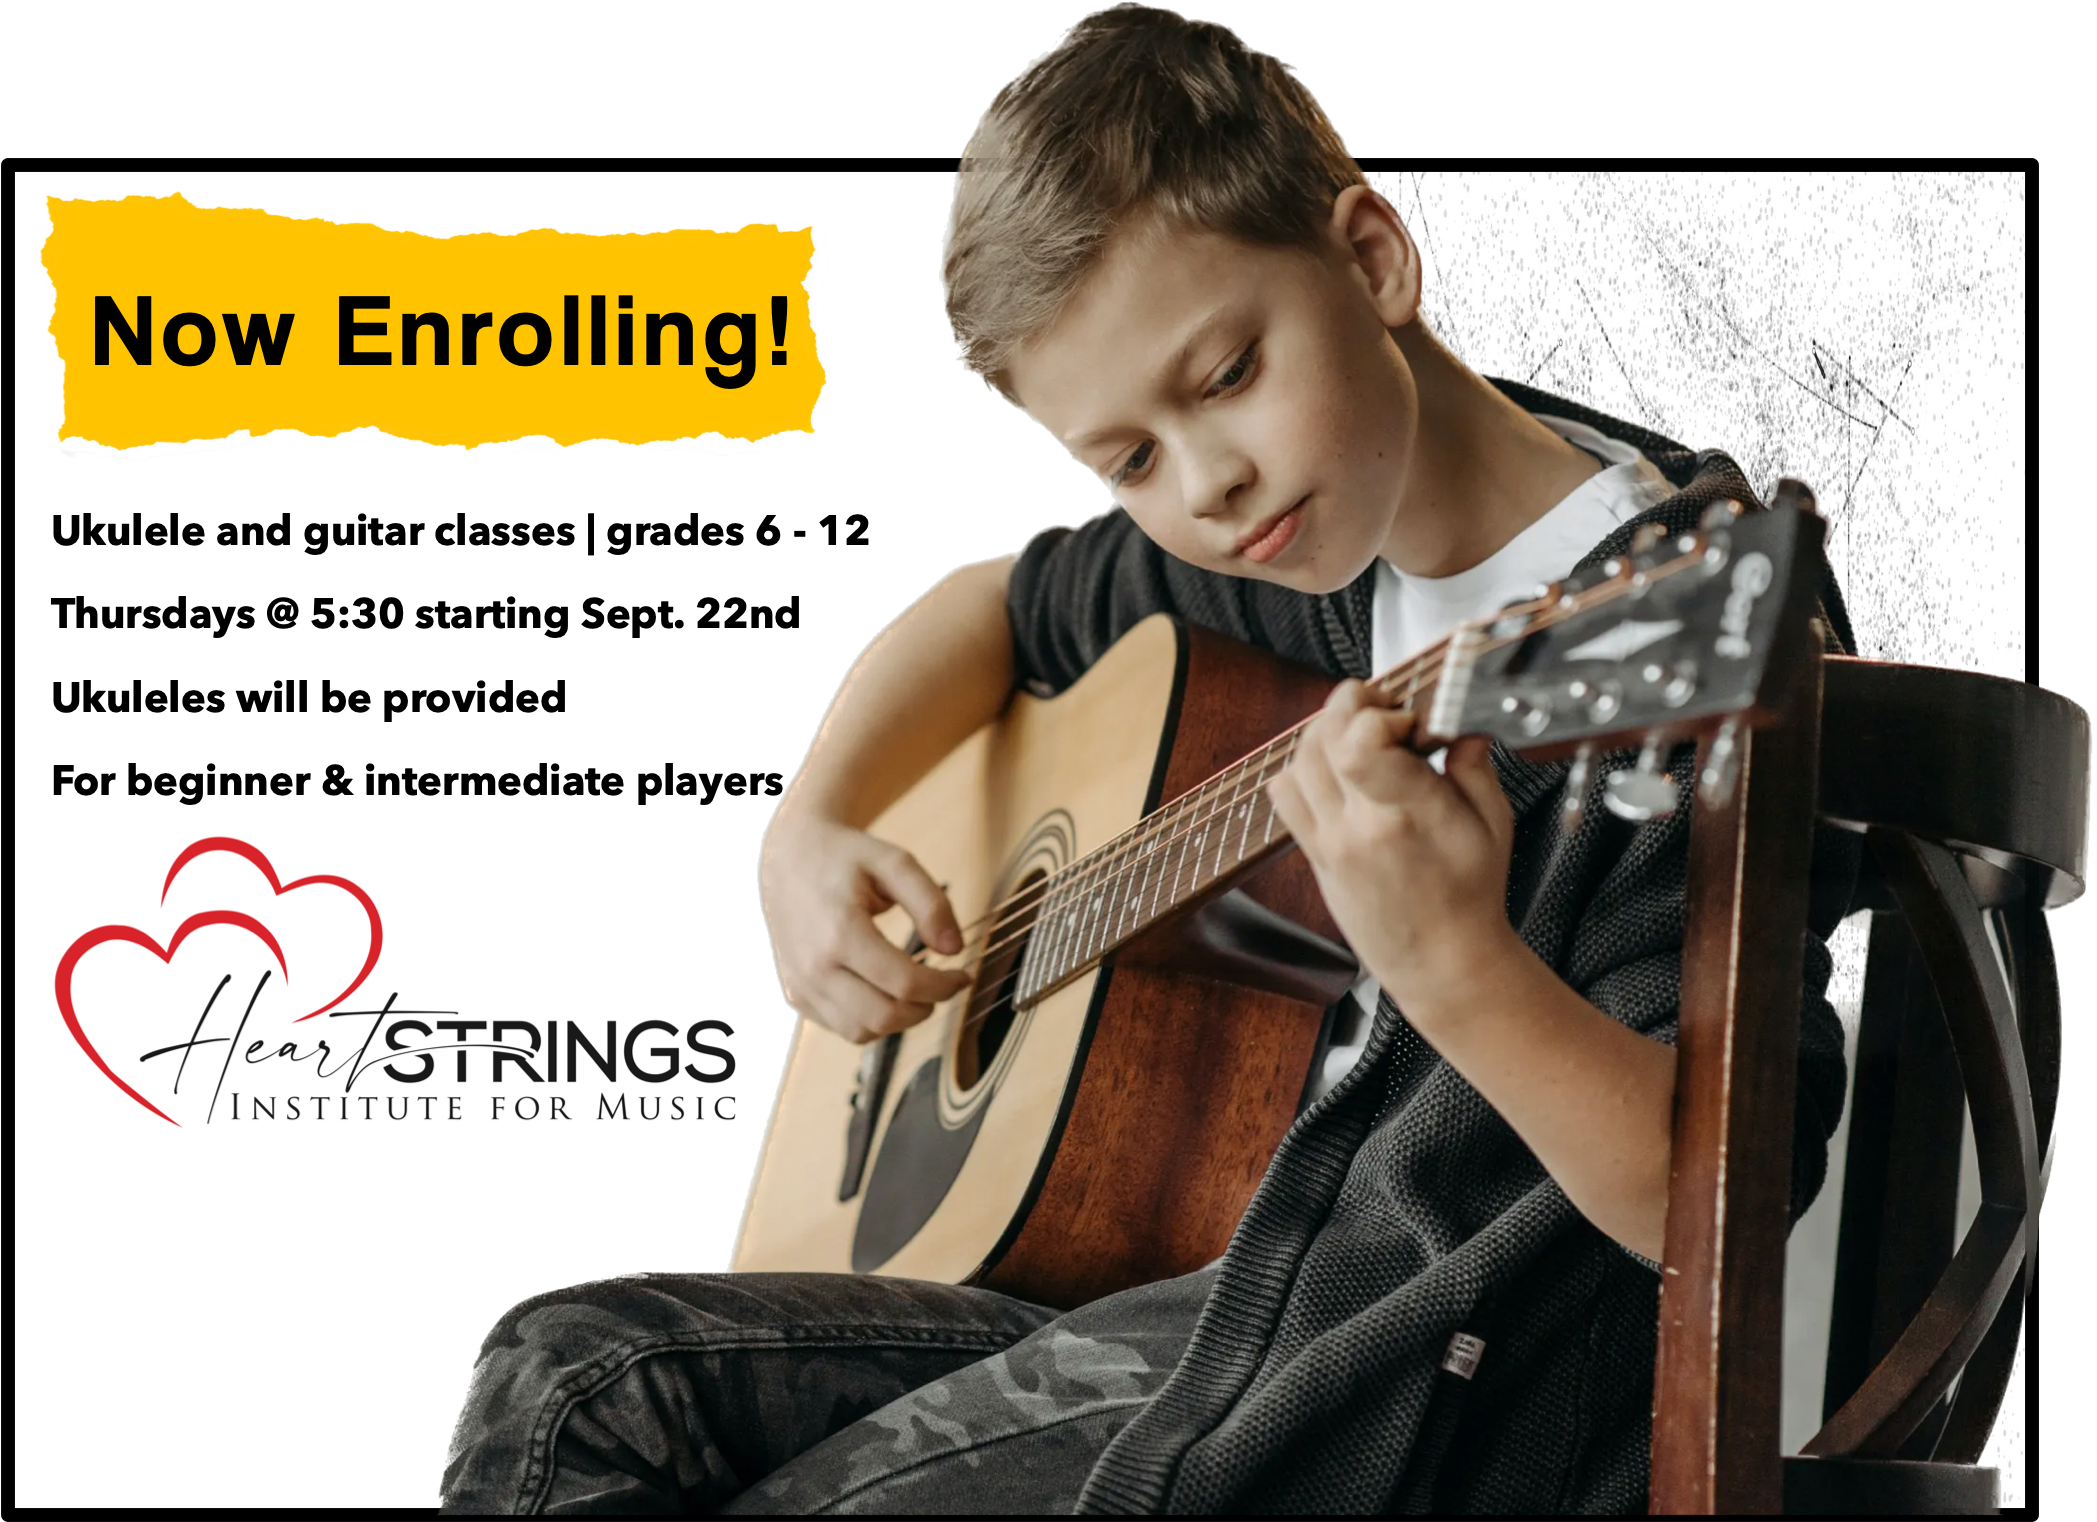 Heartstring image of child playing guitar